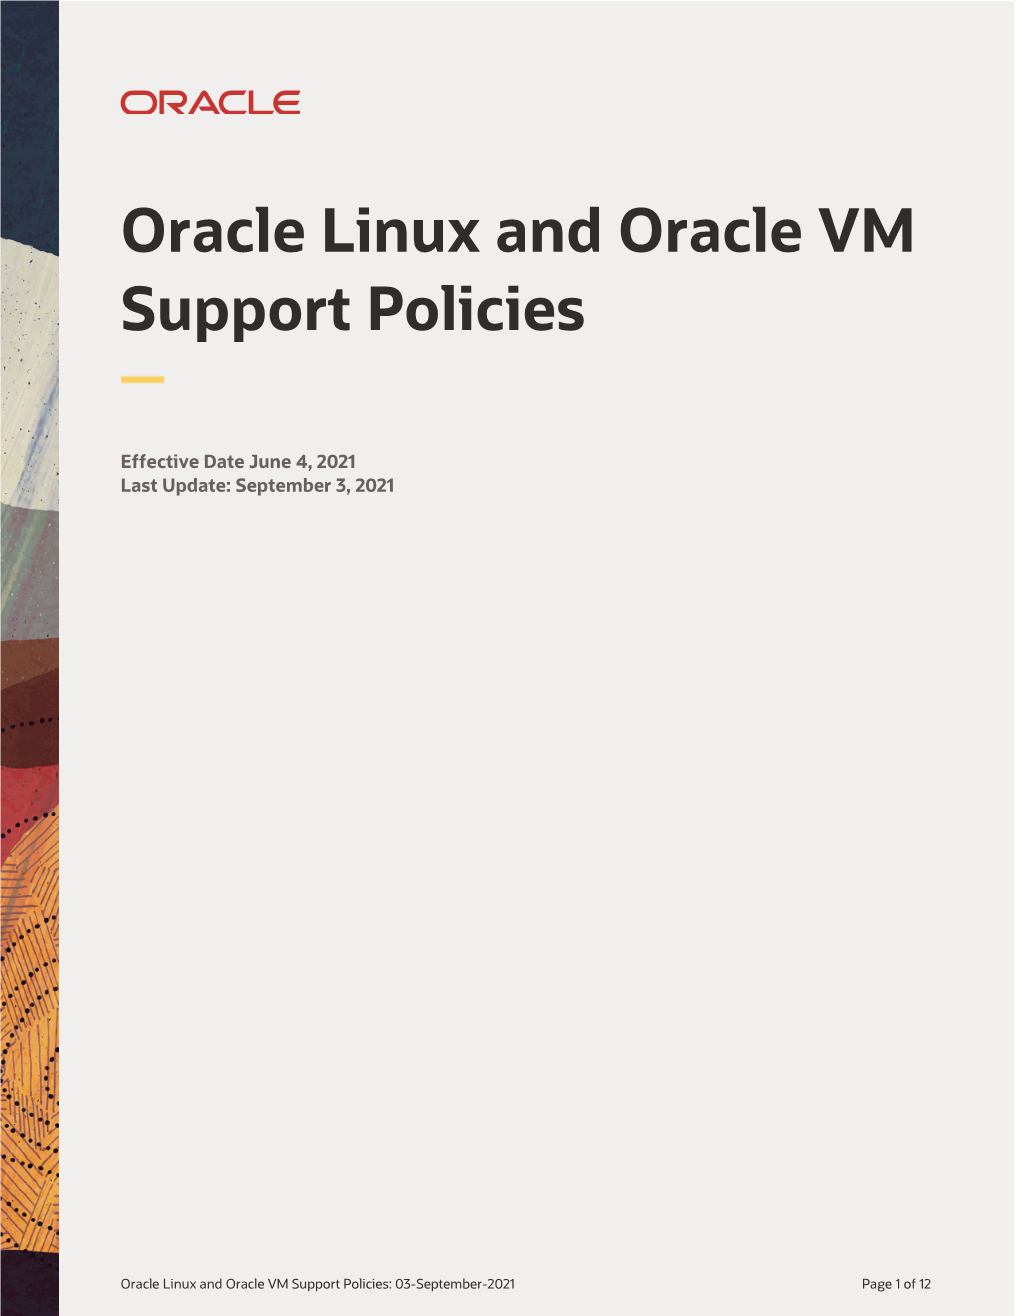 Oracle Linux and Oracle VM Support Policies